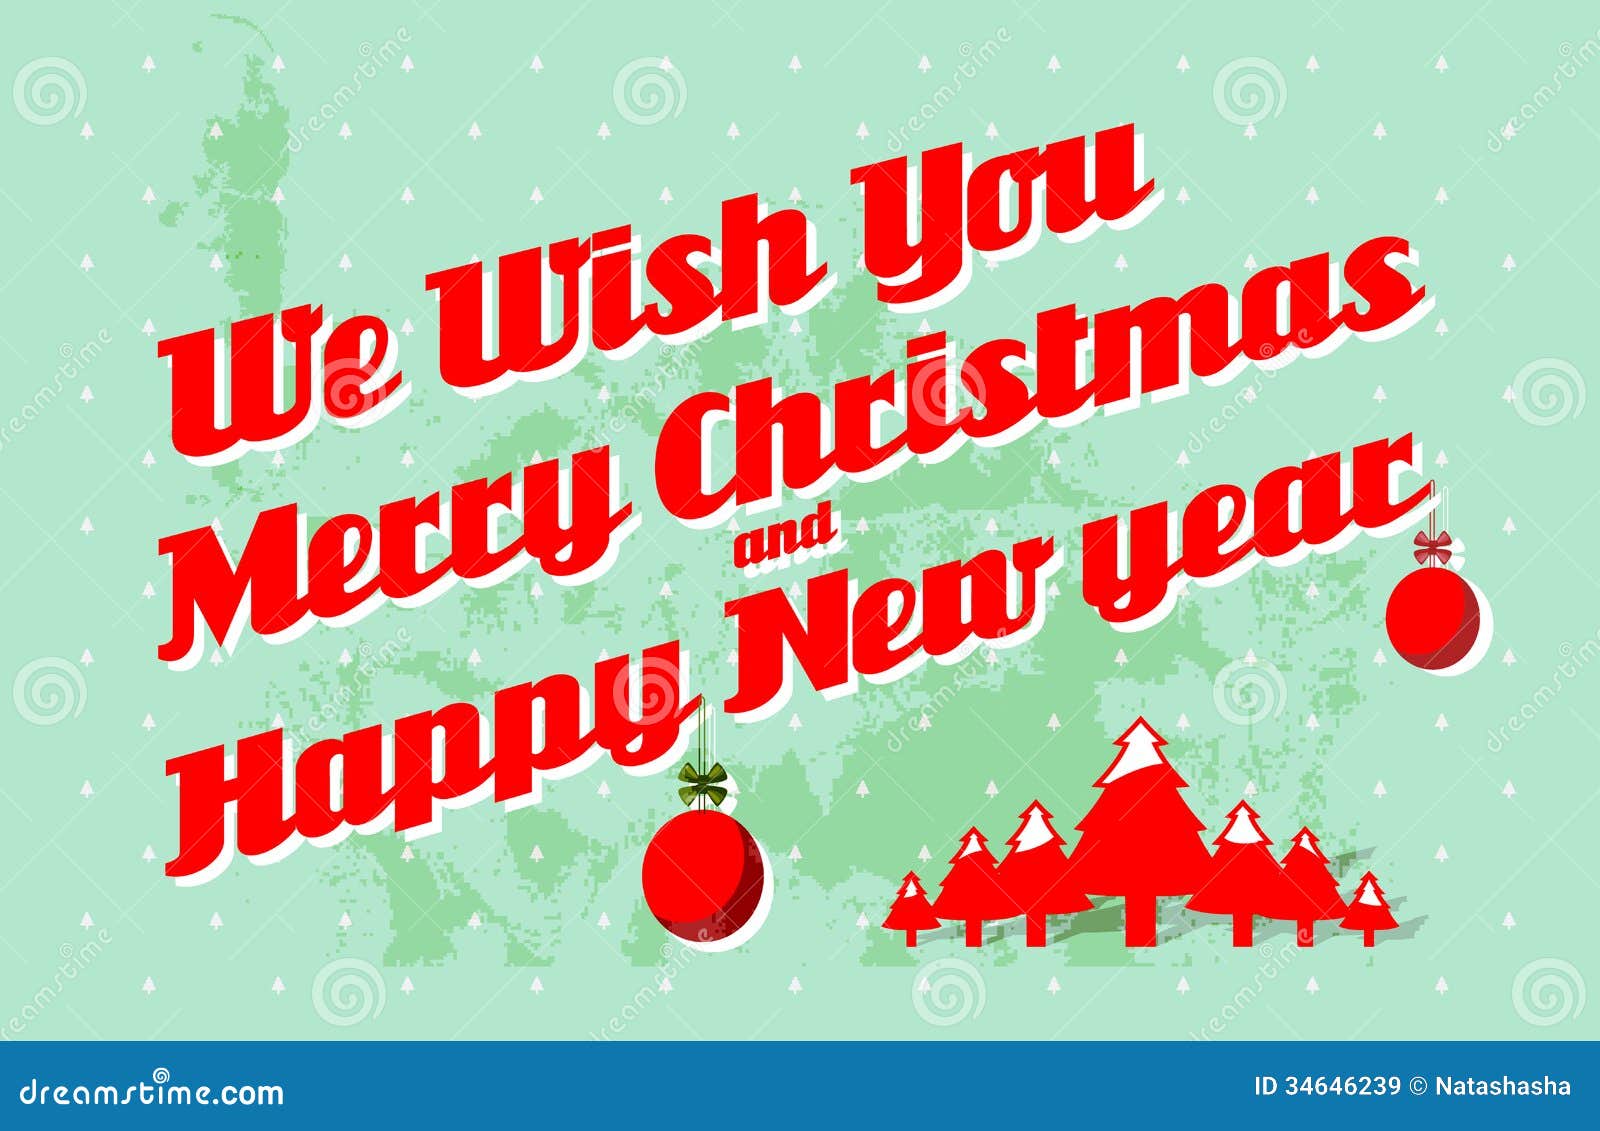 merry christmas and happy new year clip art free - photo #18